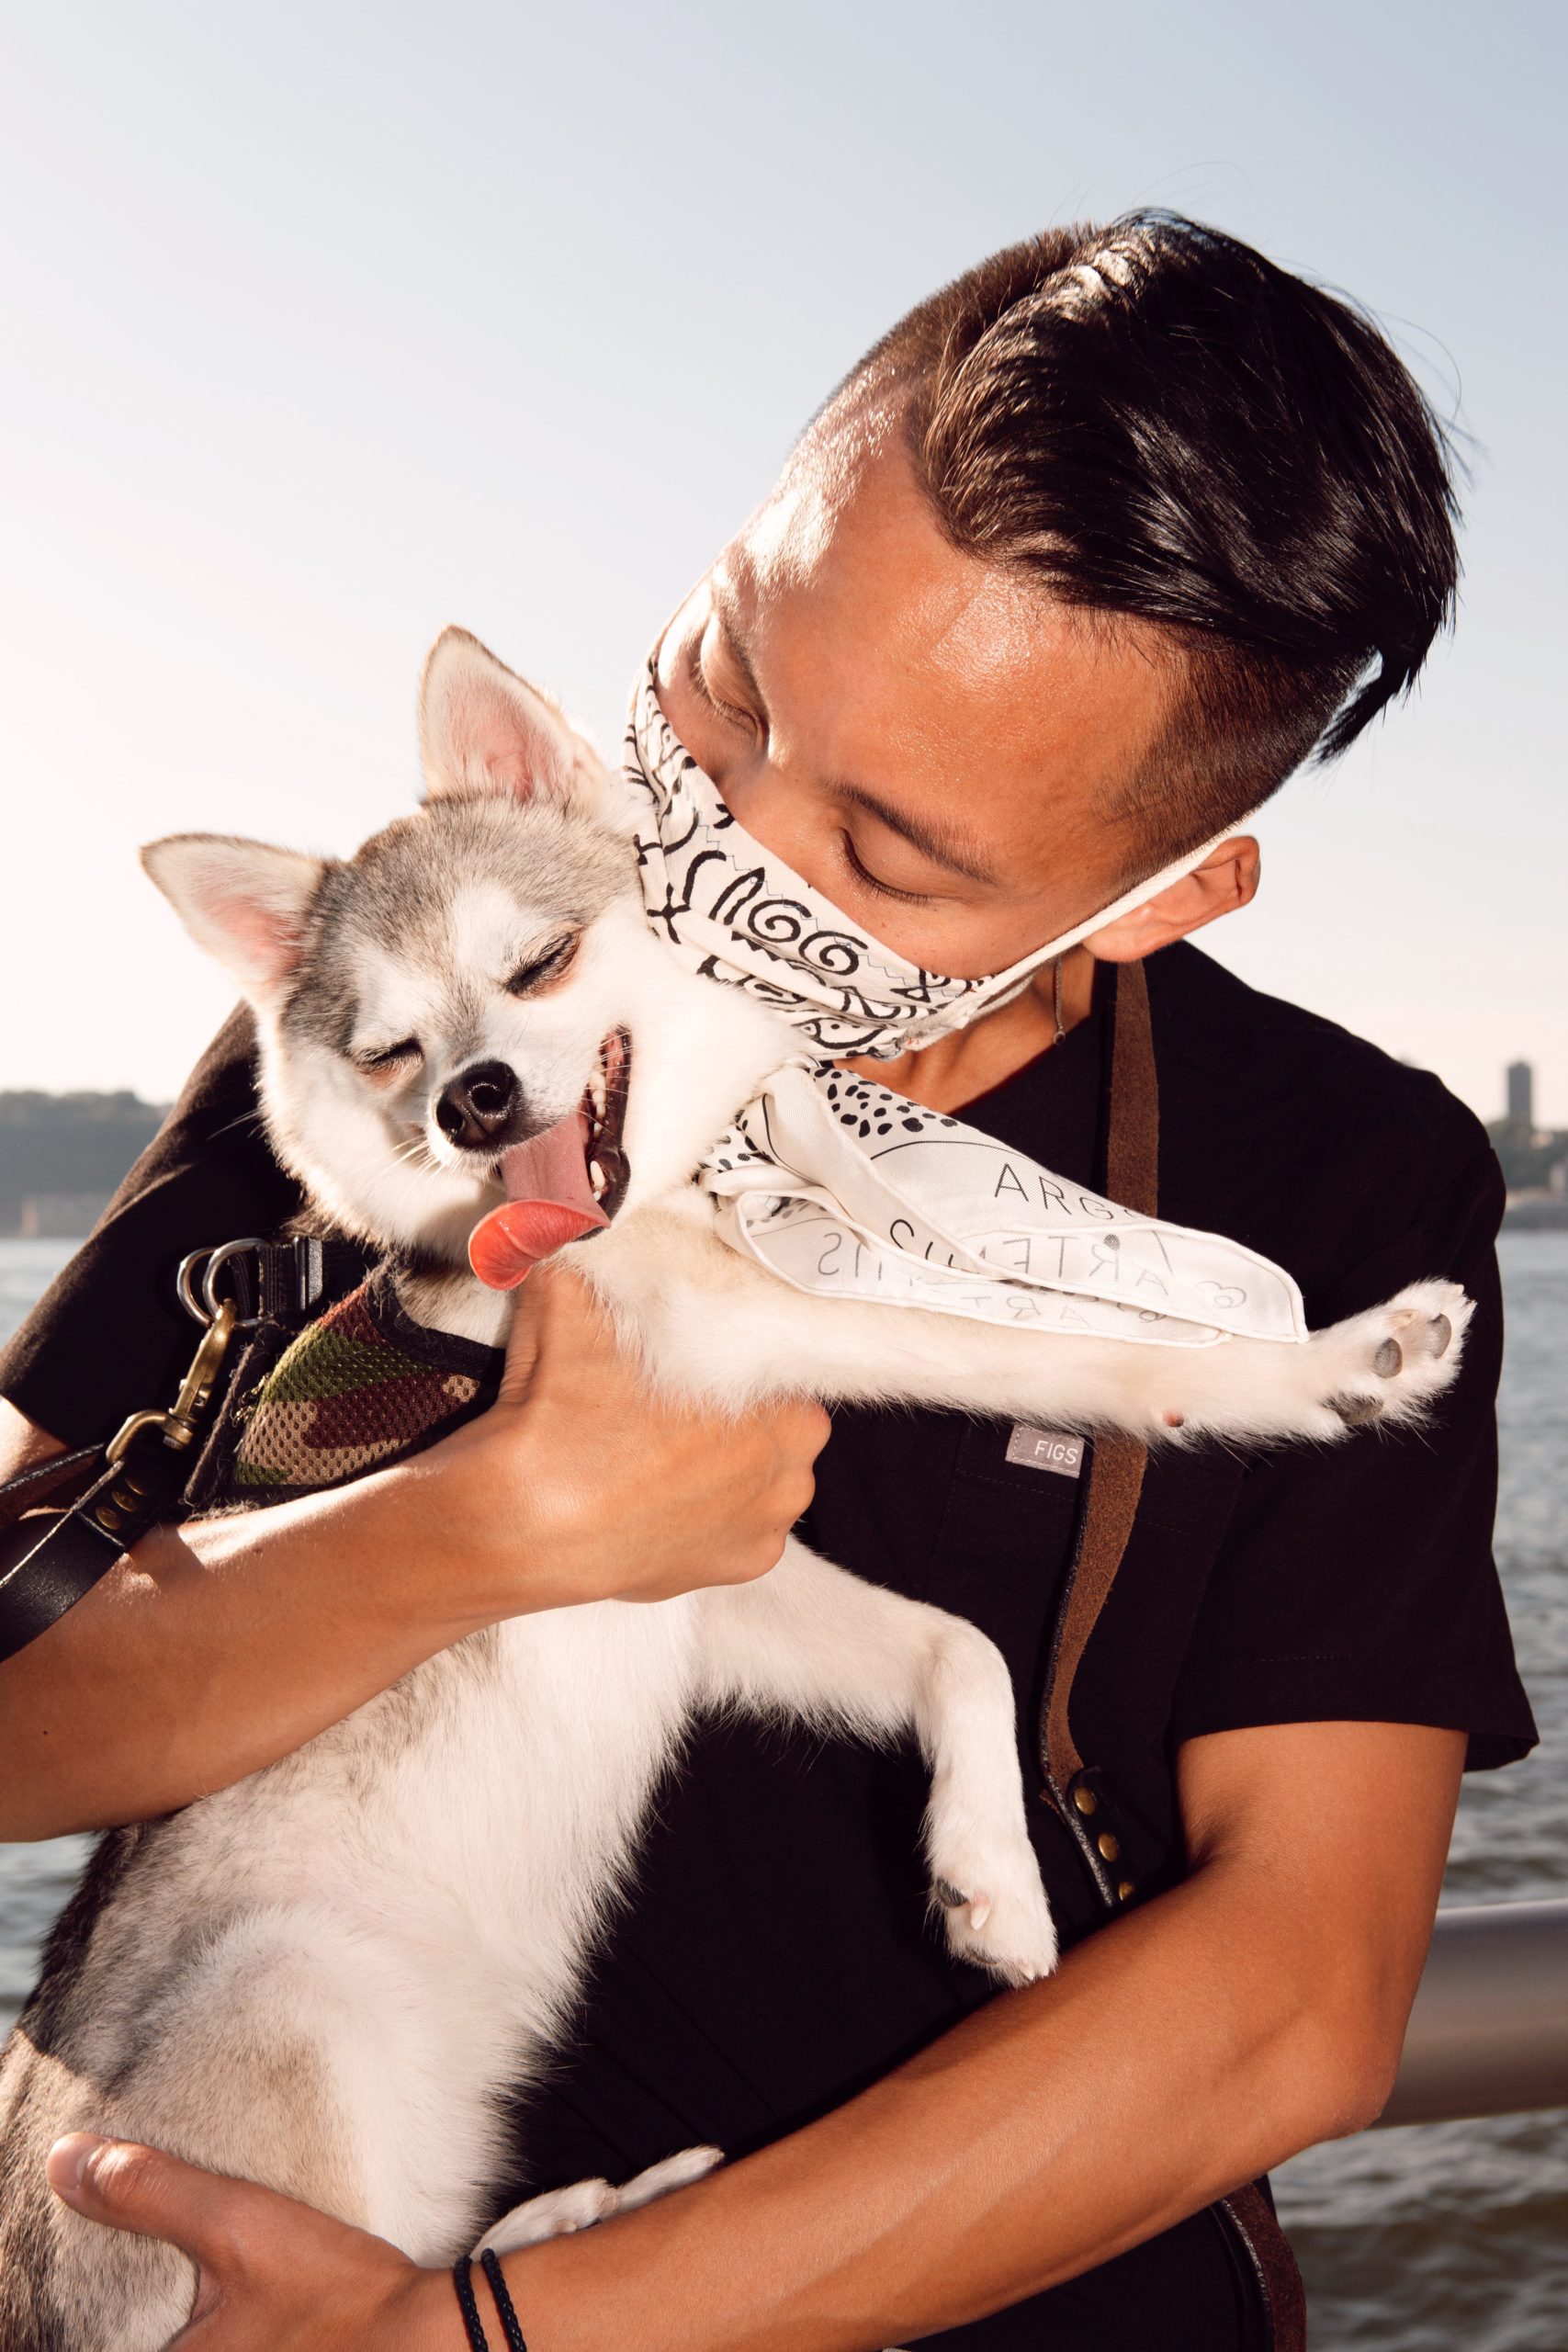 Andy Nguyen, MD, and Dasher the Klee Kai, photographed by Tayler Smith.